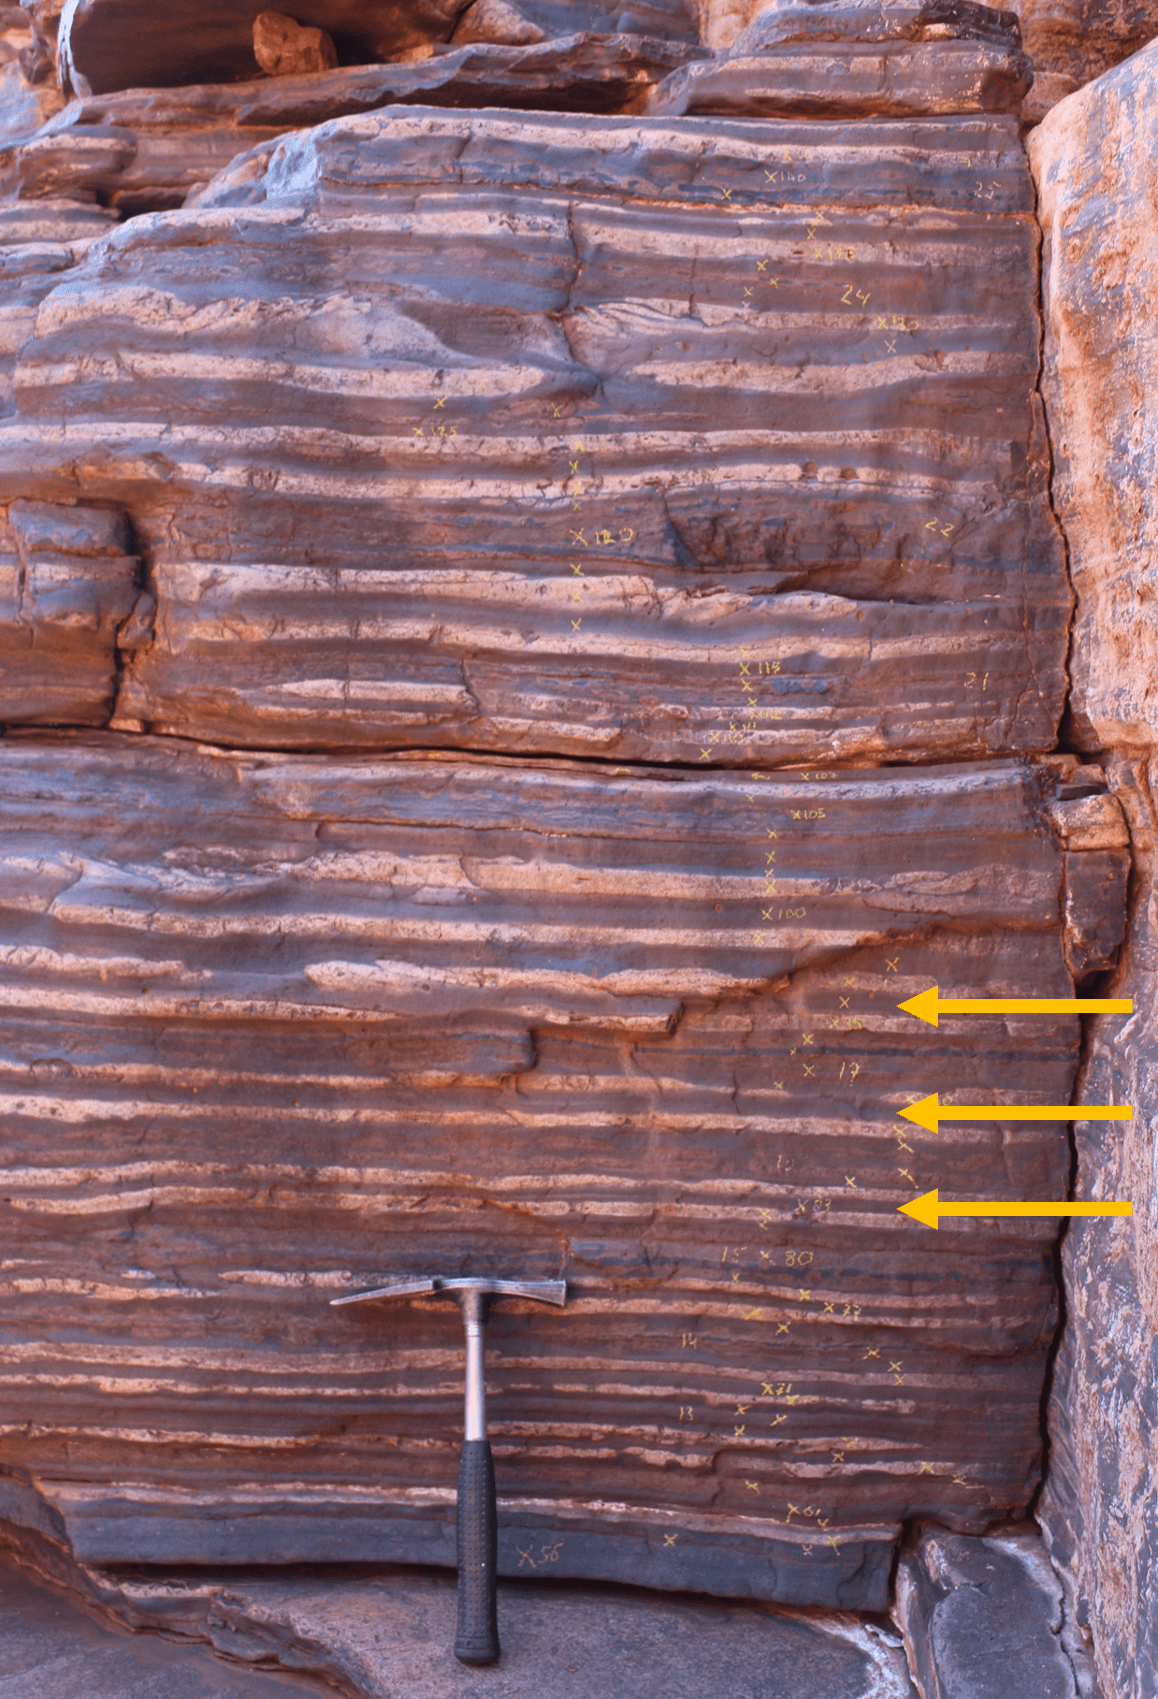 Rhythmically alternating layers of white, reddish and/or bluish-gray rocks with an average thickness of about 10 cm (see arrows).  The changes, interpreted as a signal of the Earth's motion cycle, help us estimate the distance between the Earth and the Moon 2.46 billion years ago.